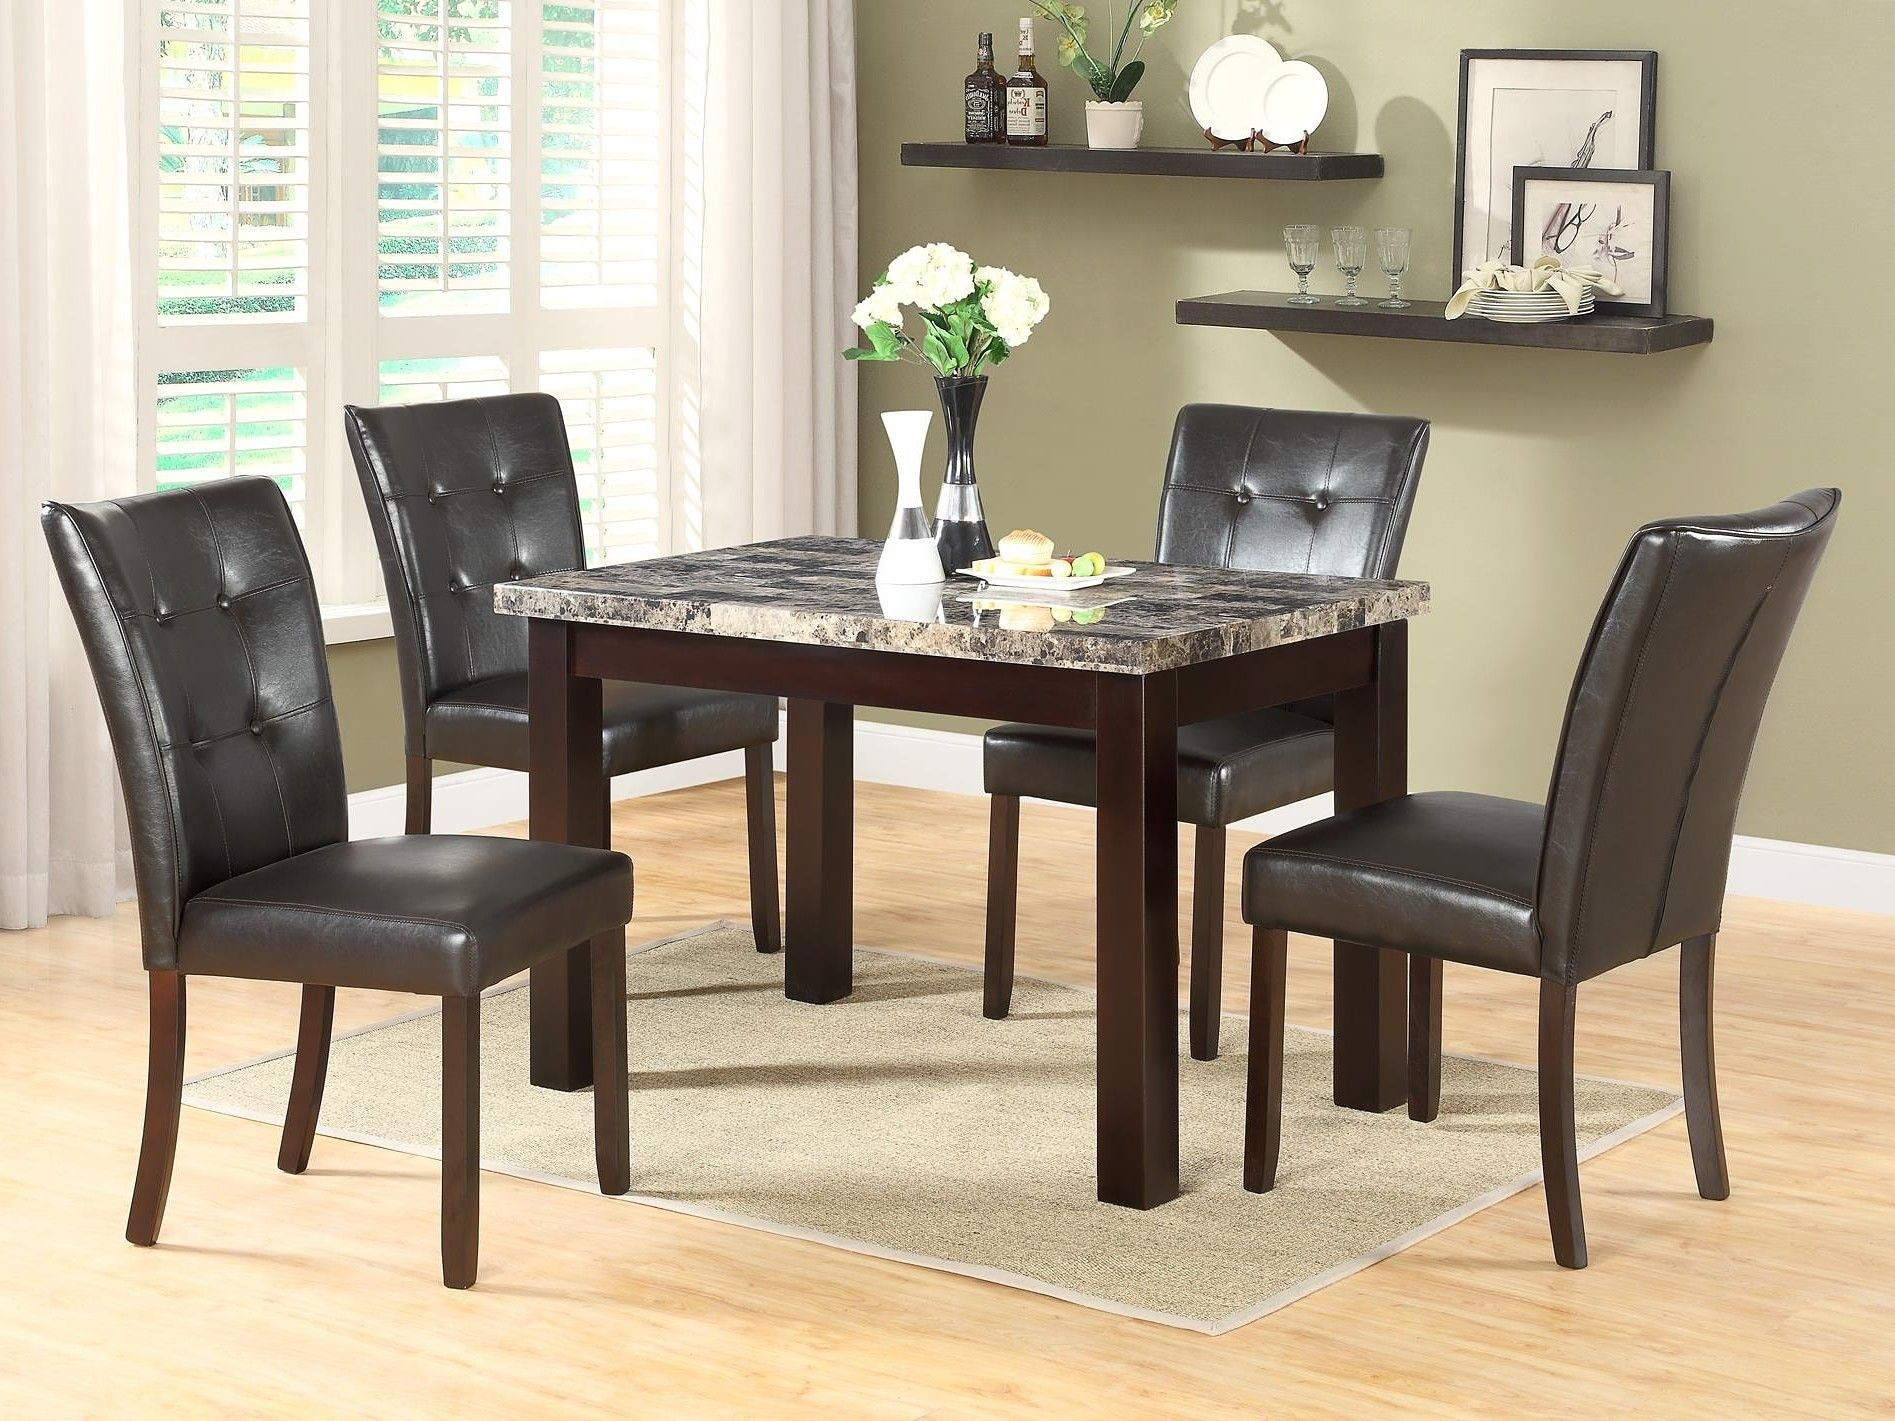 New! 5PC Marble Dining Set *FREE SAME DAY DELIVERY*